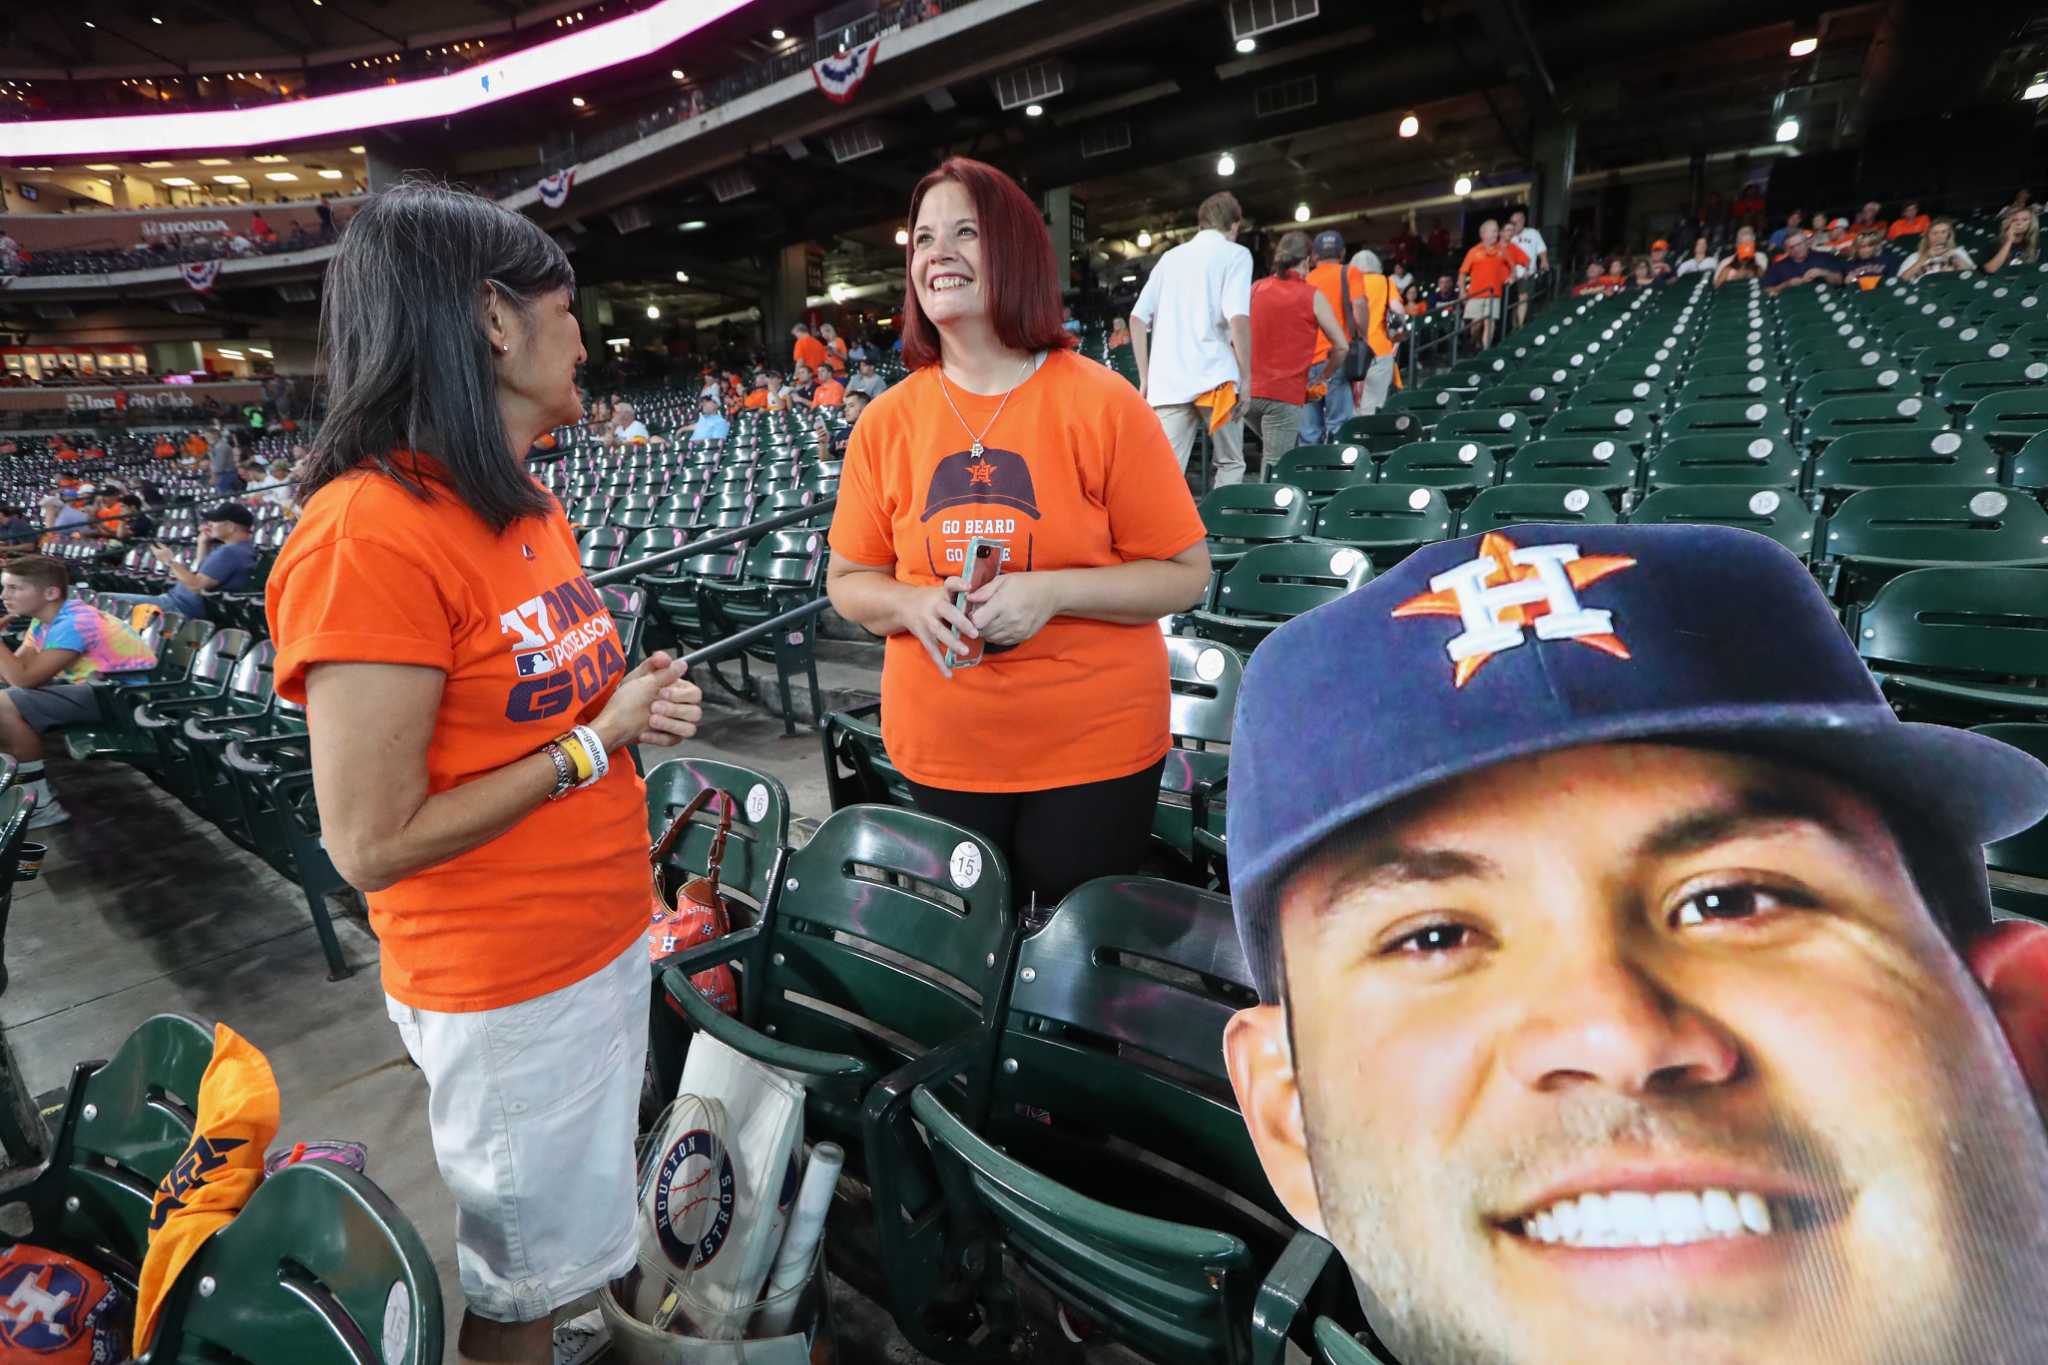 On Astros bandwagon? You're not done shopping until things get intimate